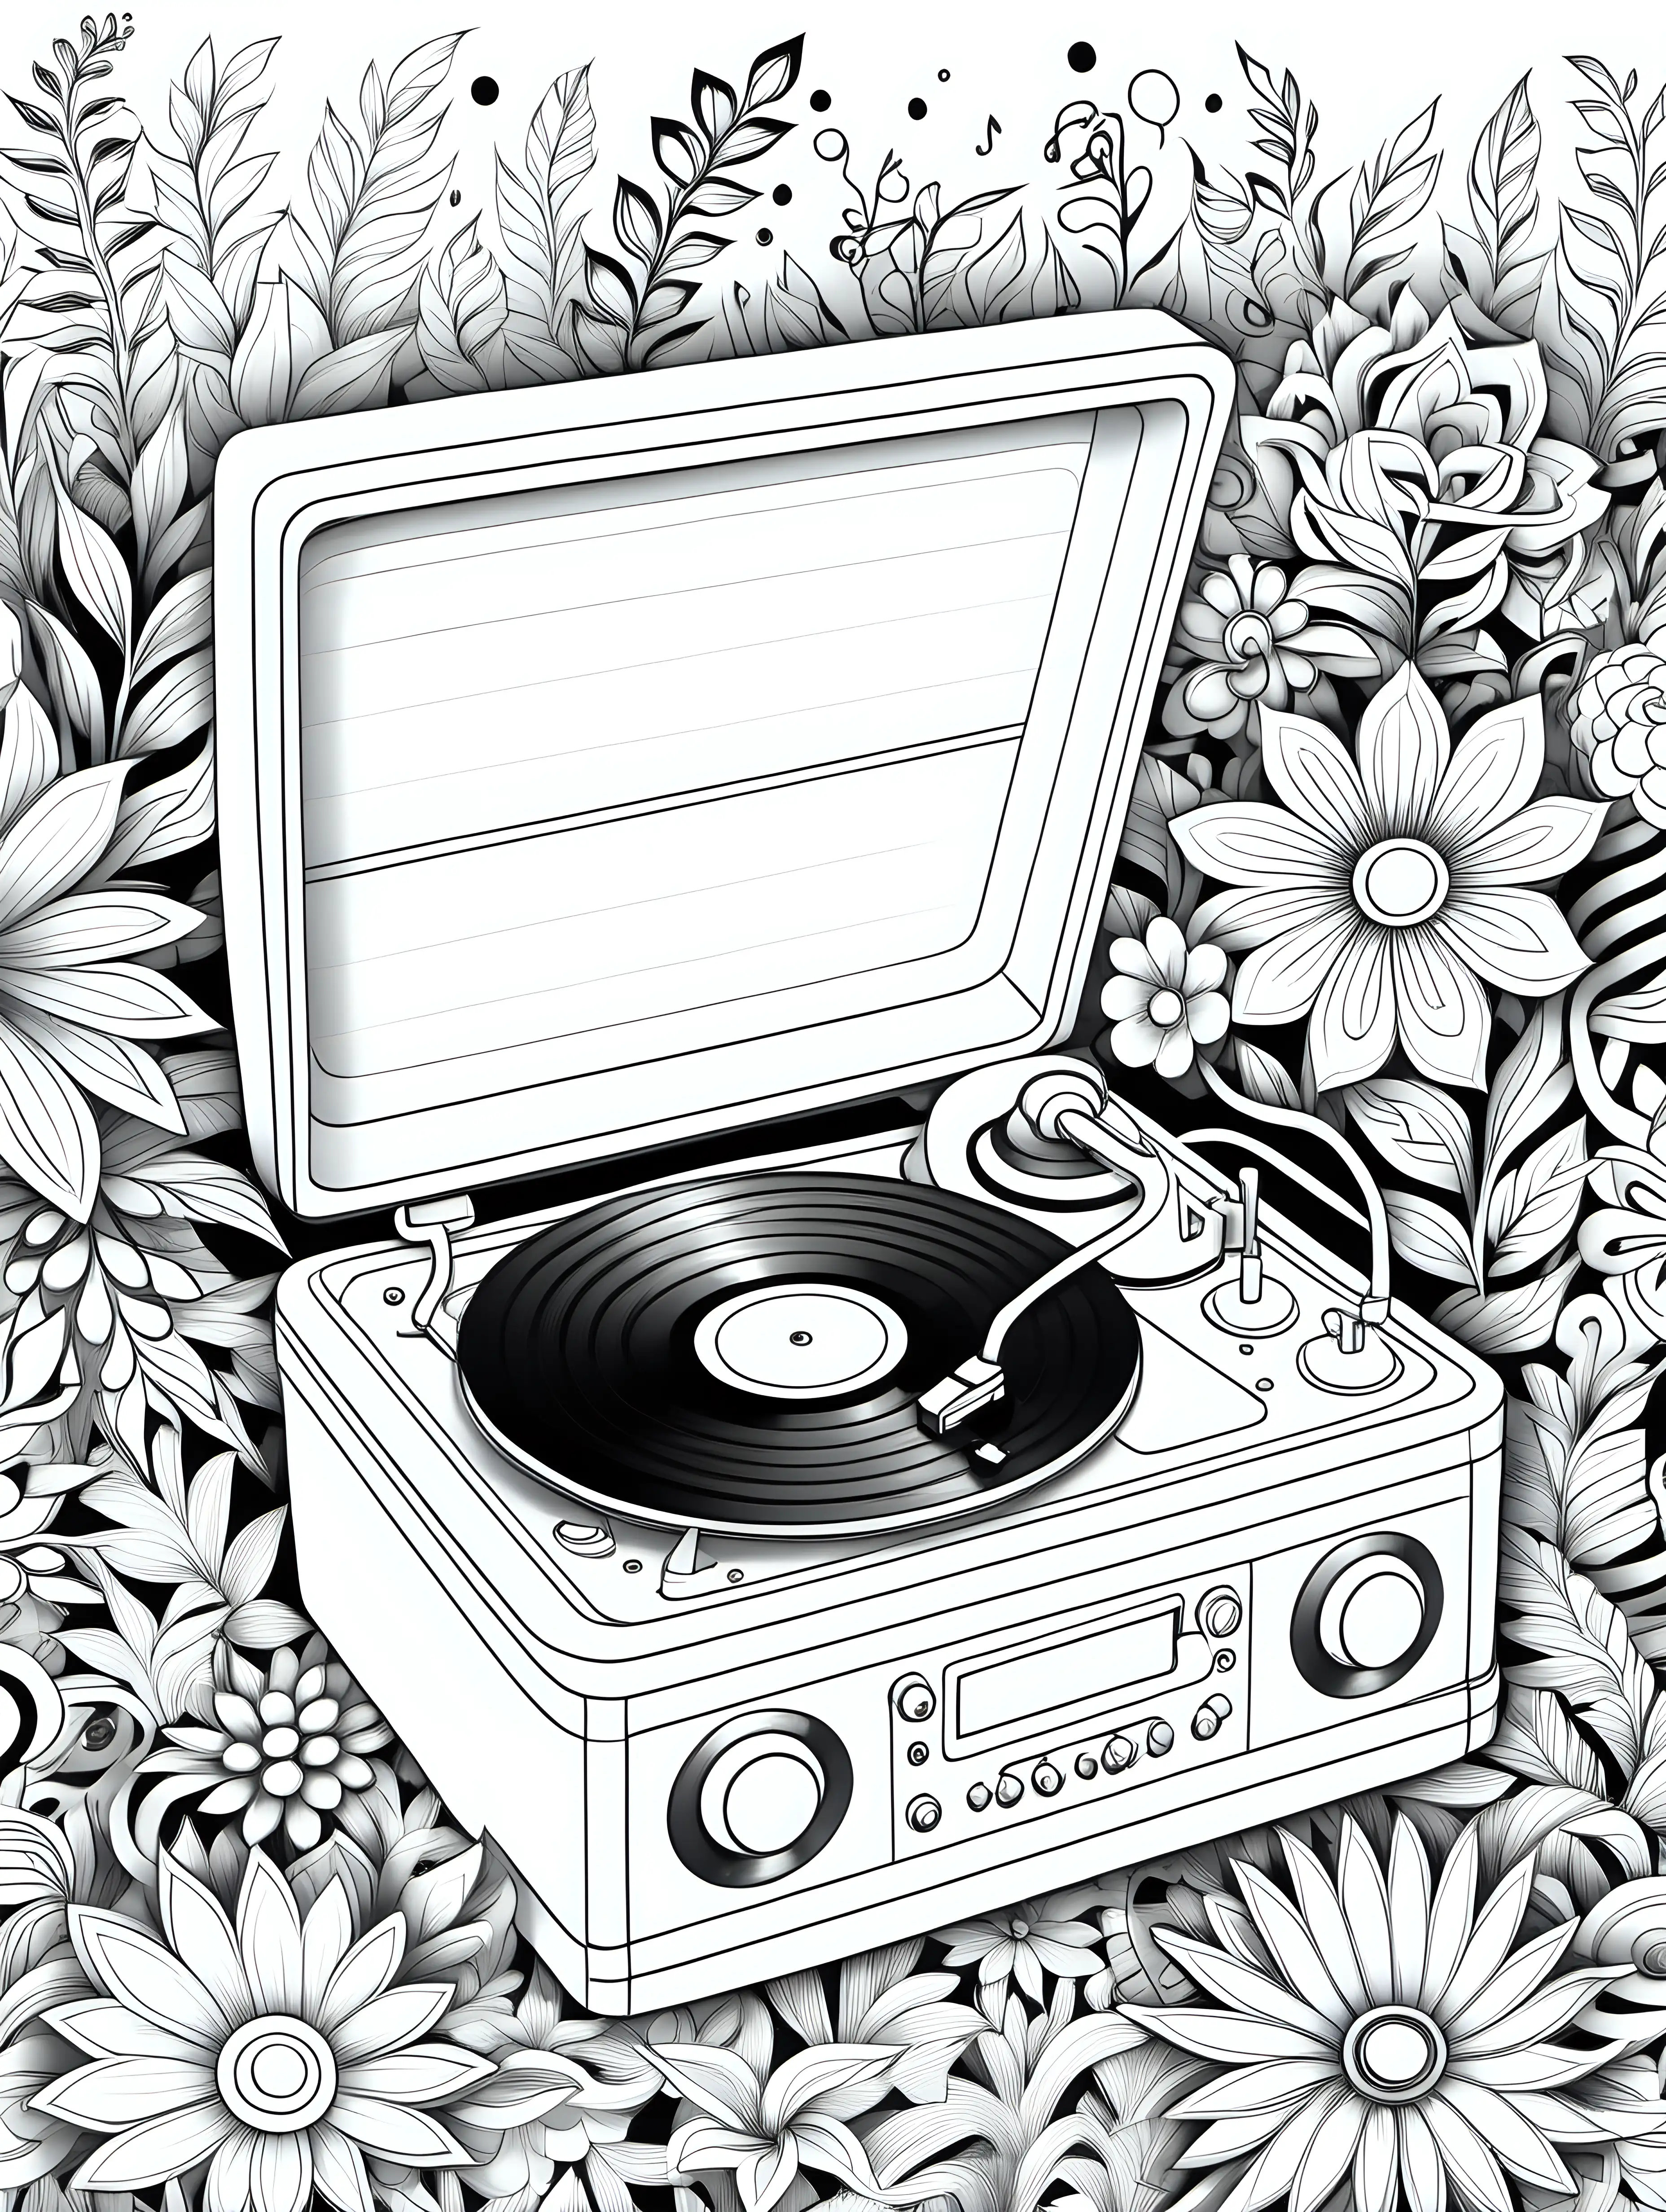 Vintage Record Player Coloring Page for Children Retro Doodle Fun